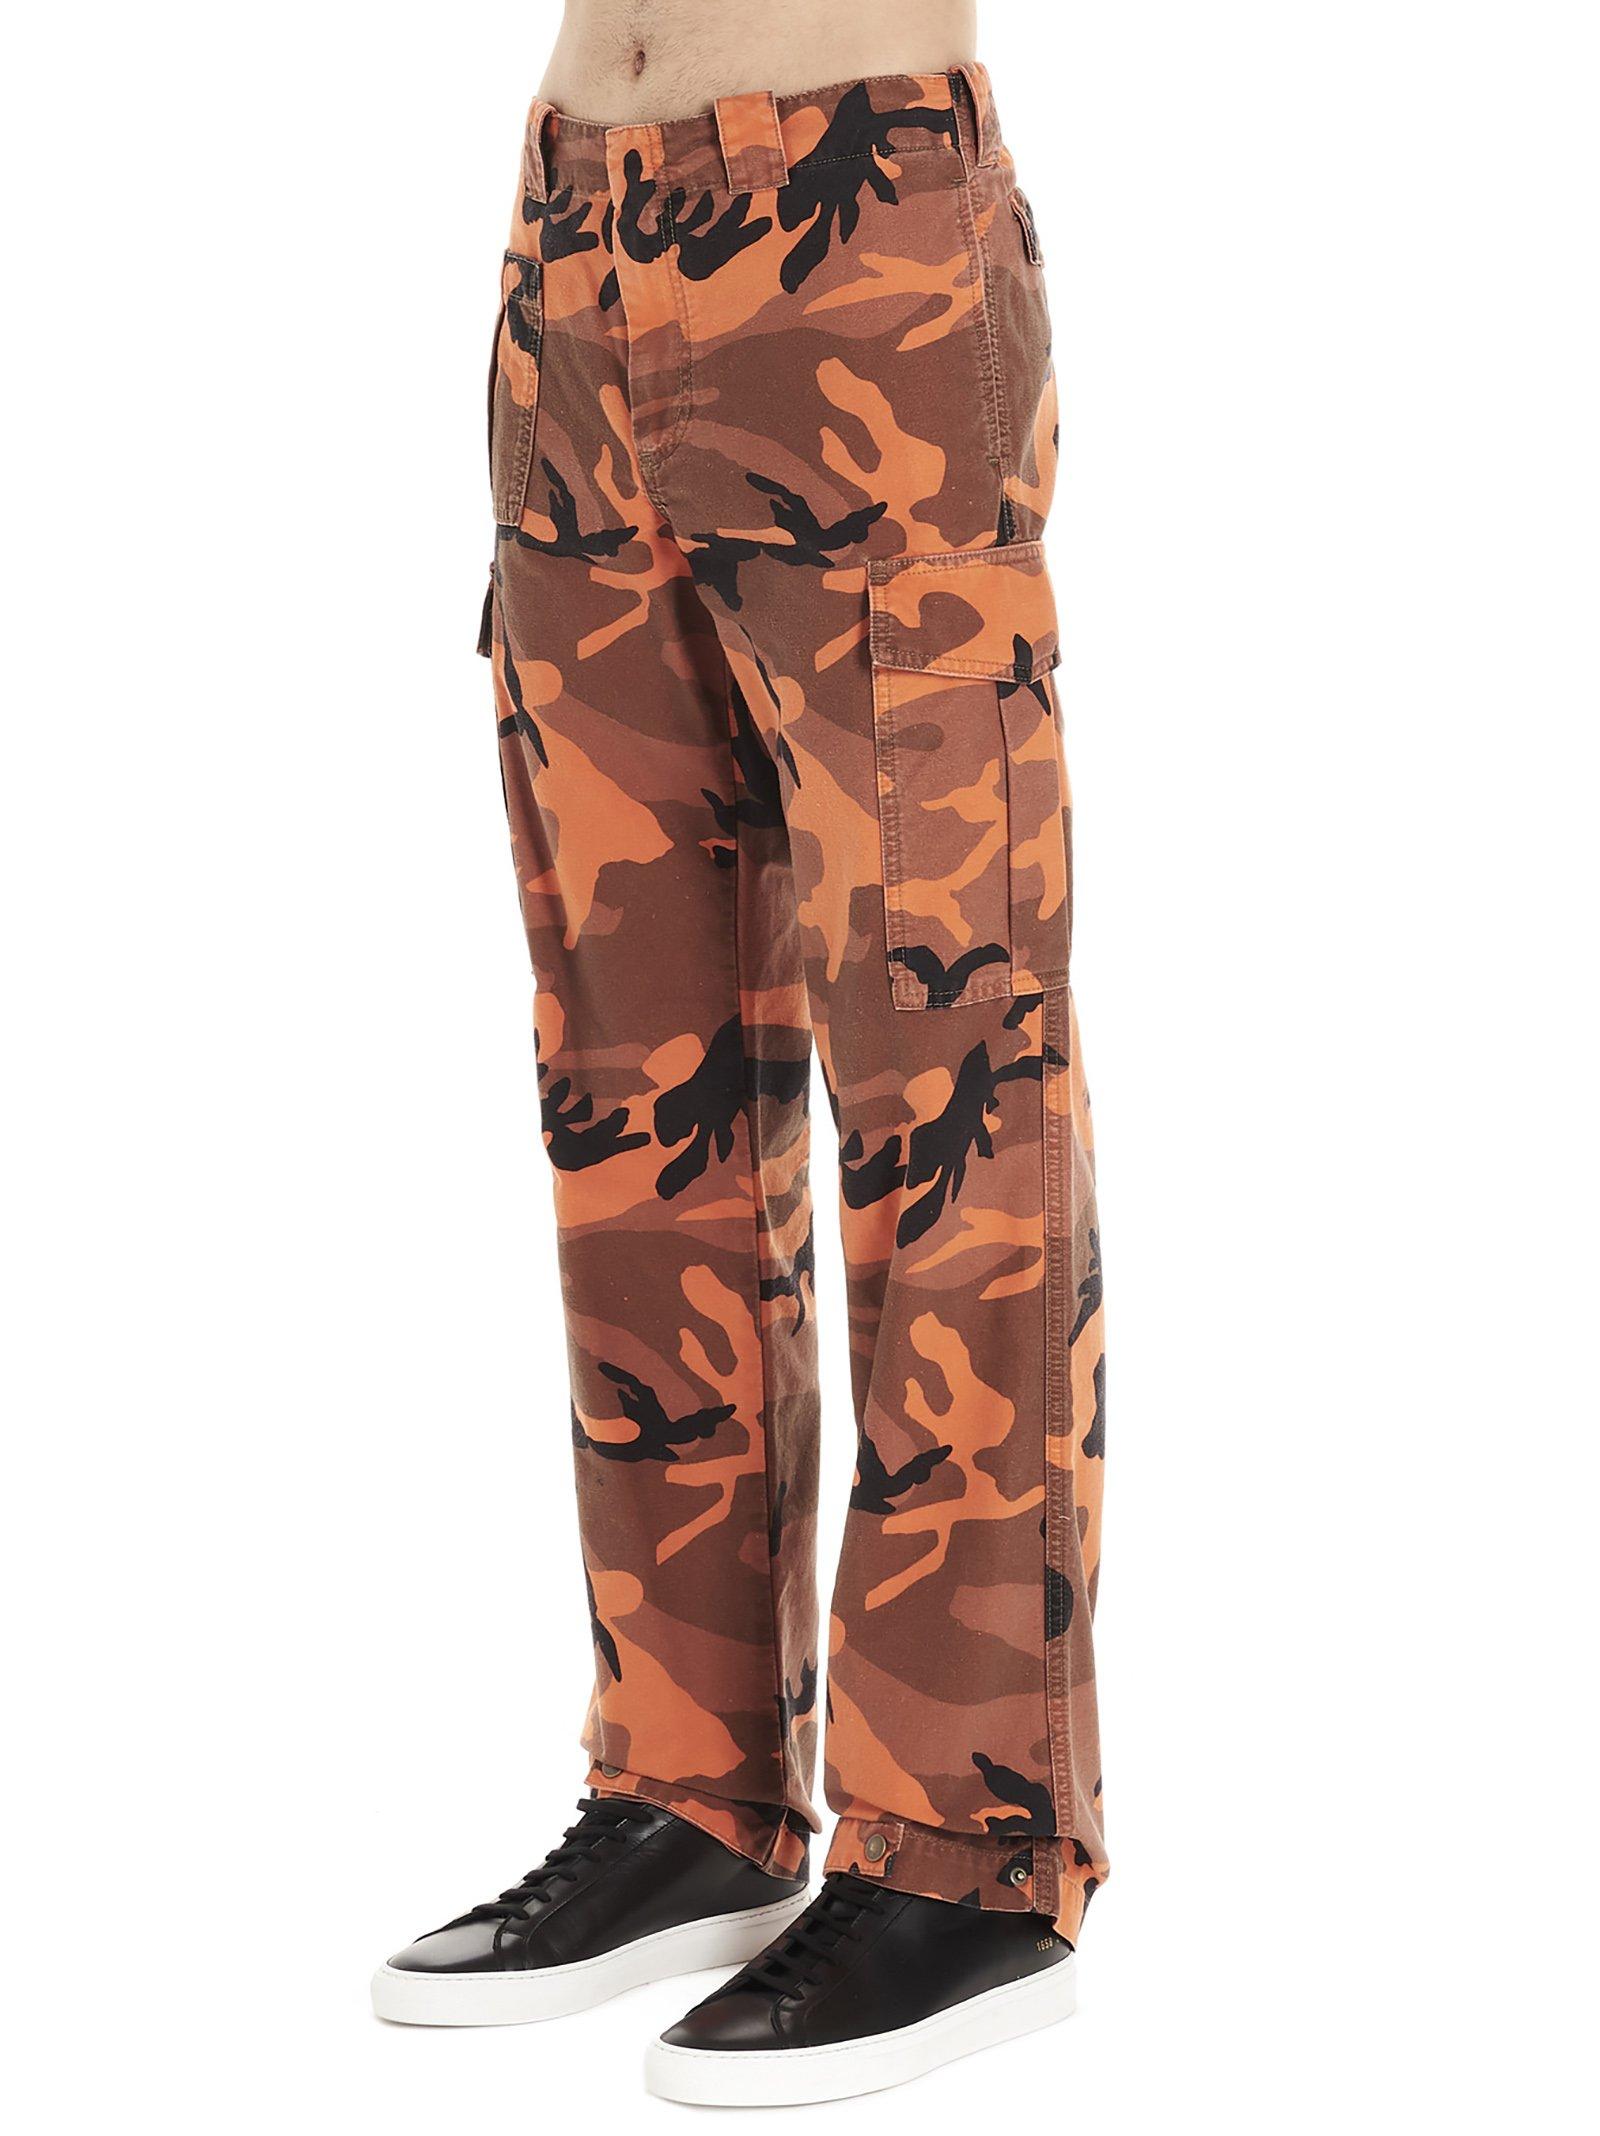 McQ Cotton Camouflage Cargo Pants in Orange for Men - Lyst